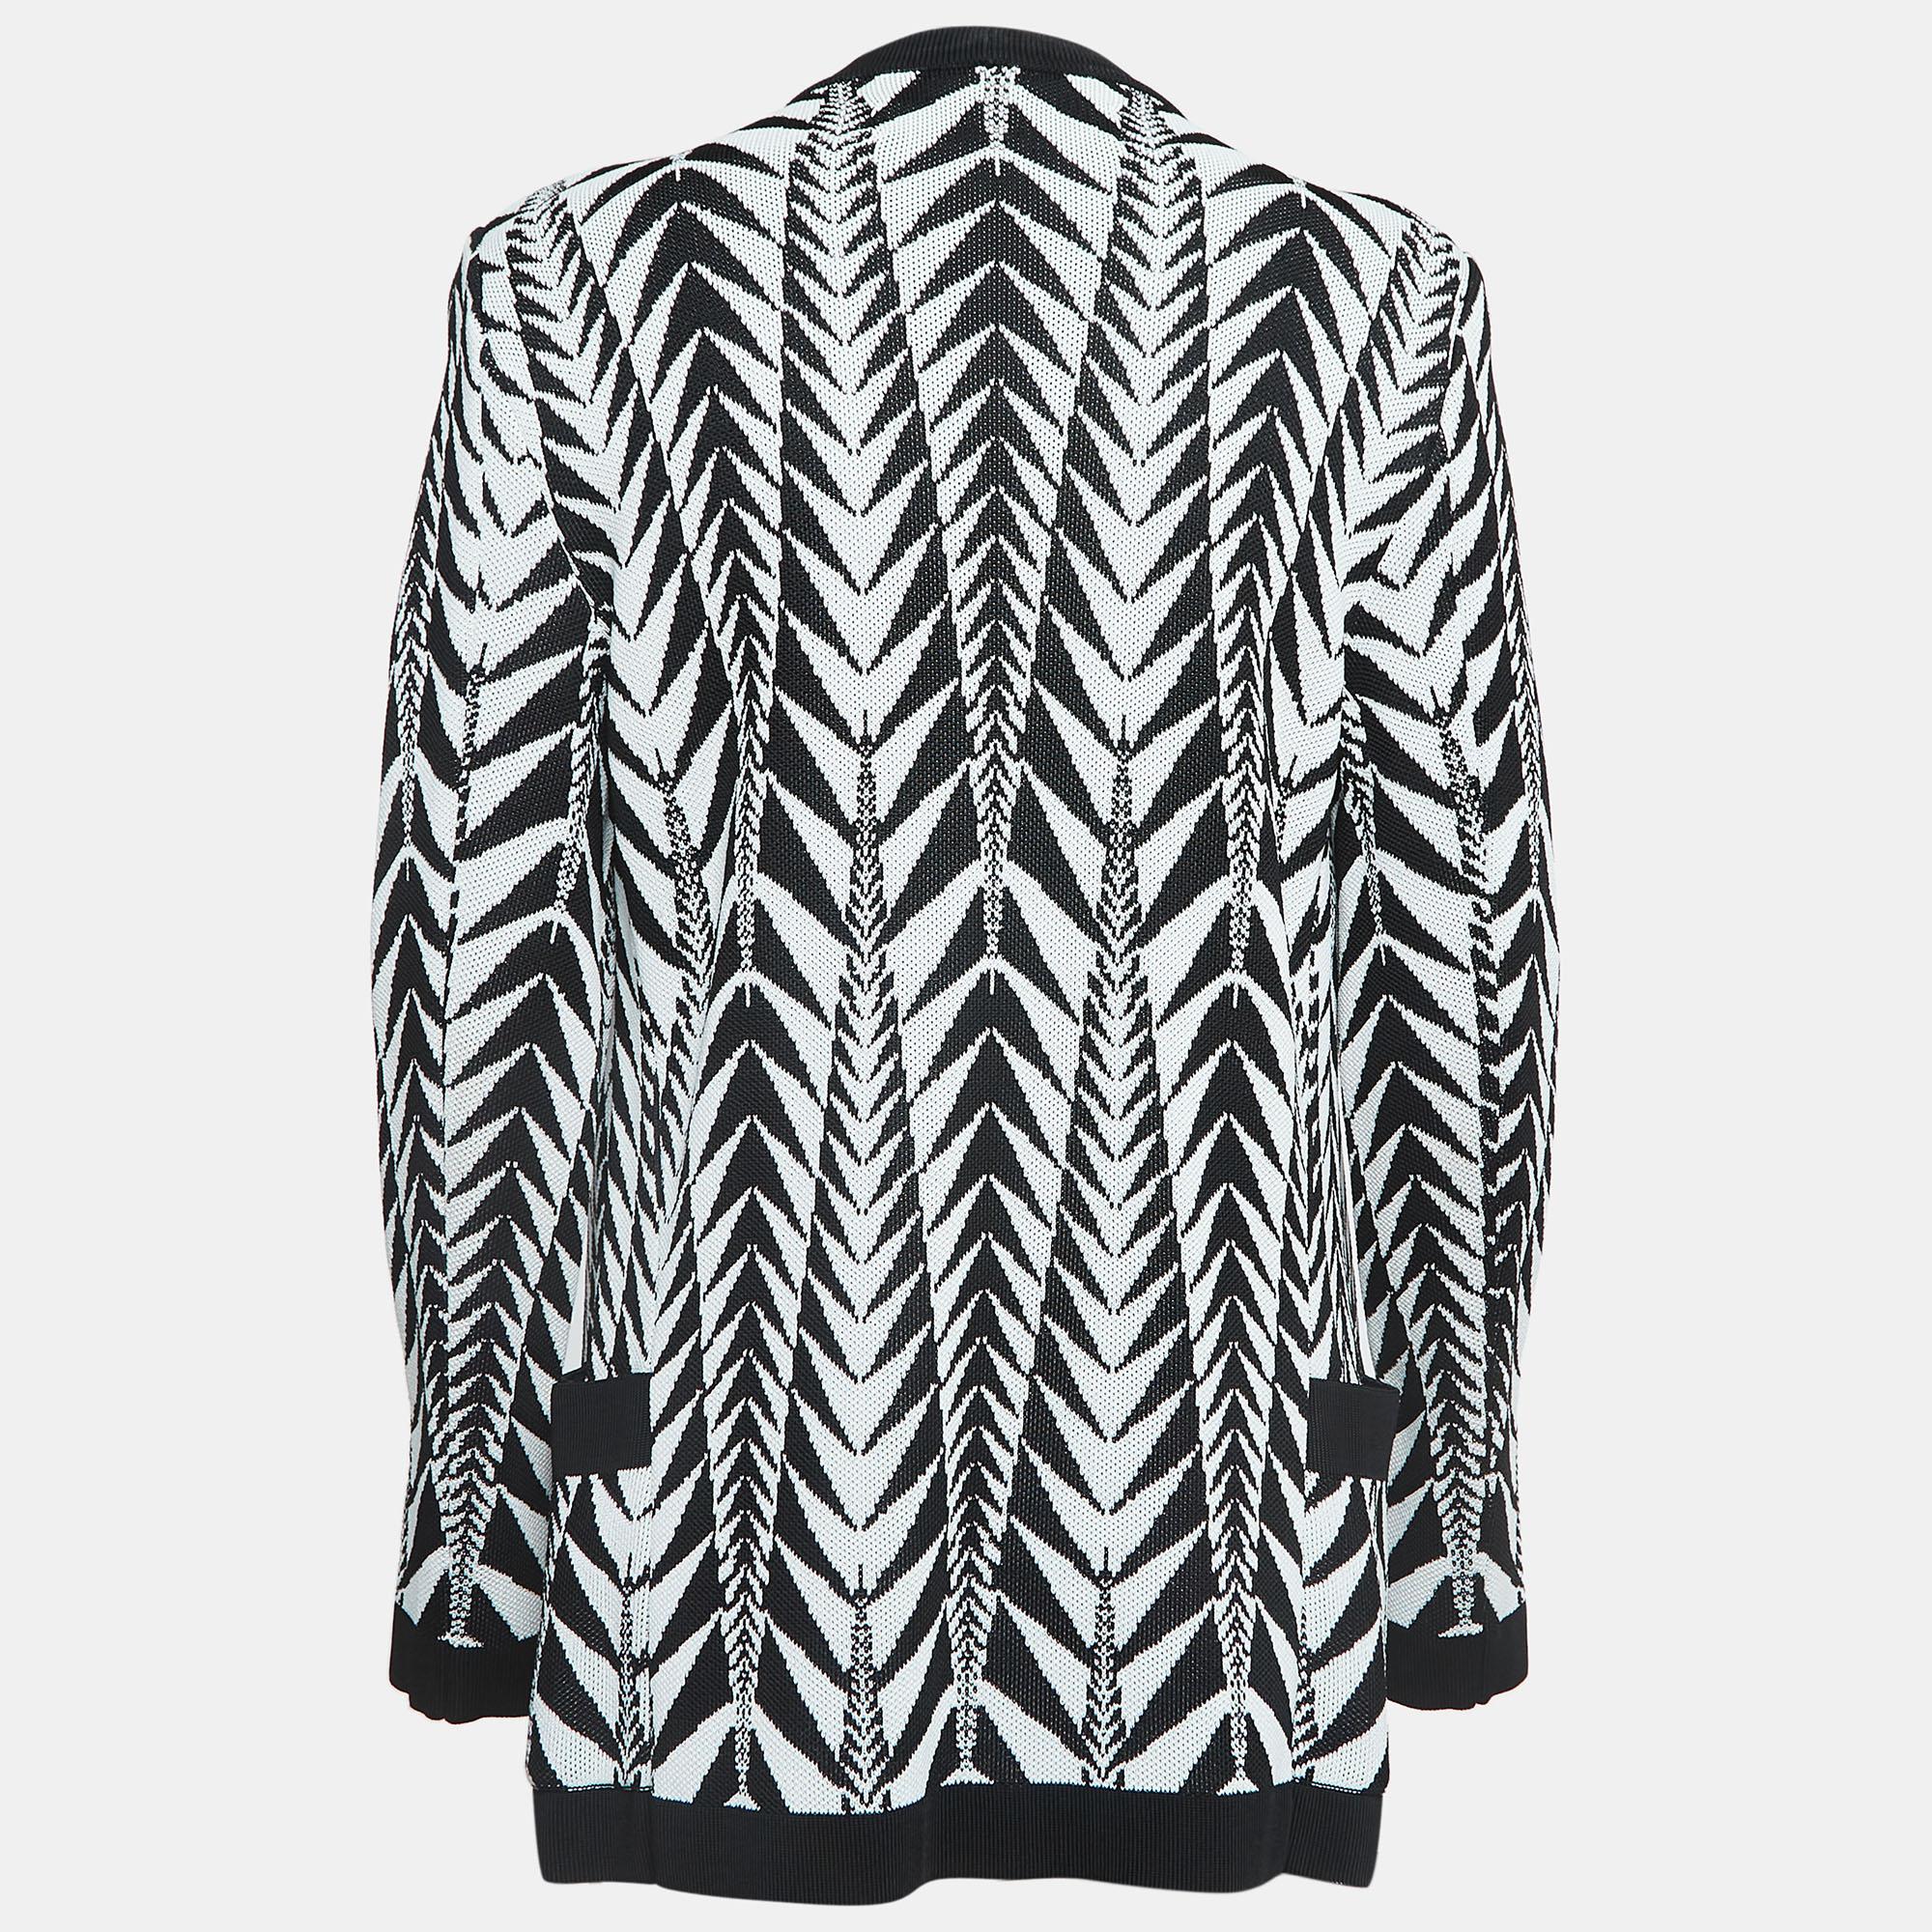 Stay warm and stylish all day as you step out wearing this cardigan from Balmain. It features an attractive design and a superb fit. Complement this cardigan by wearing it with your favorite pair of pants.

